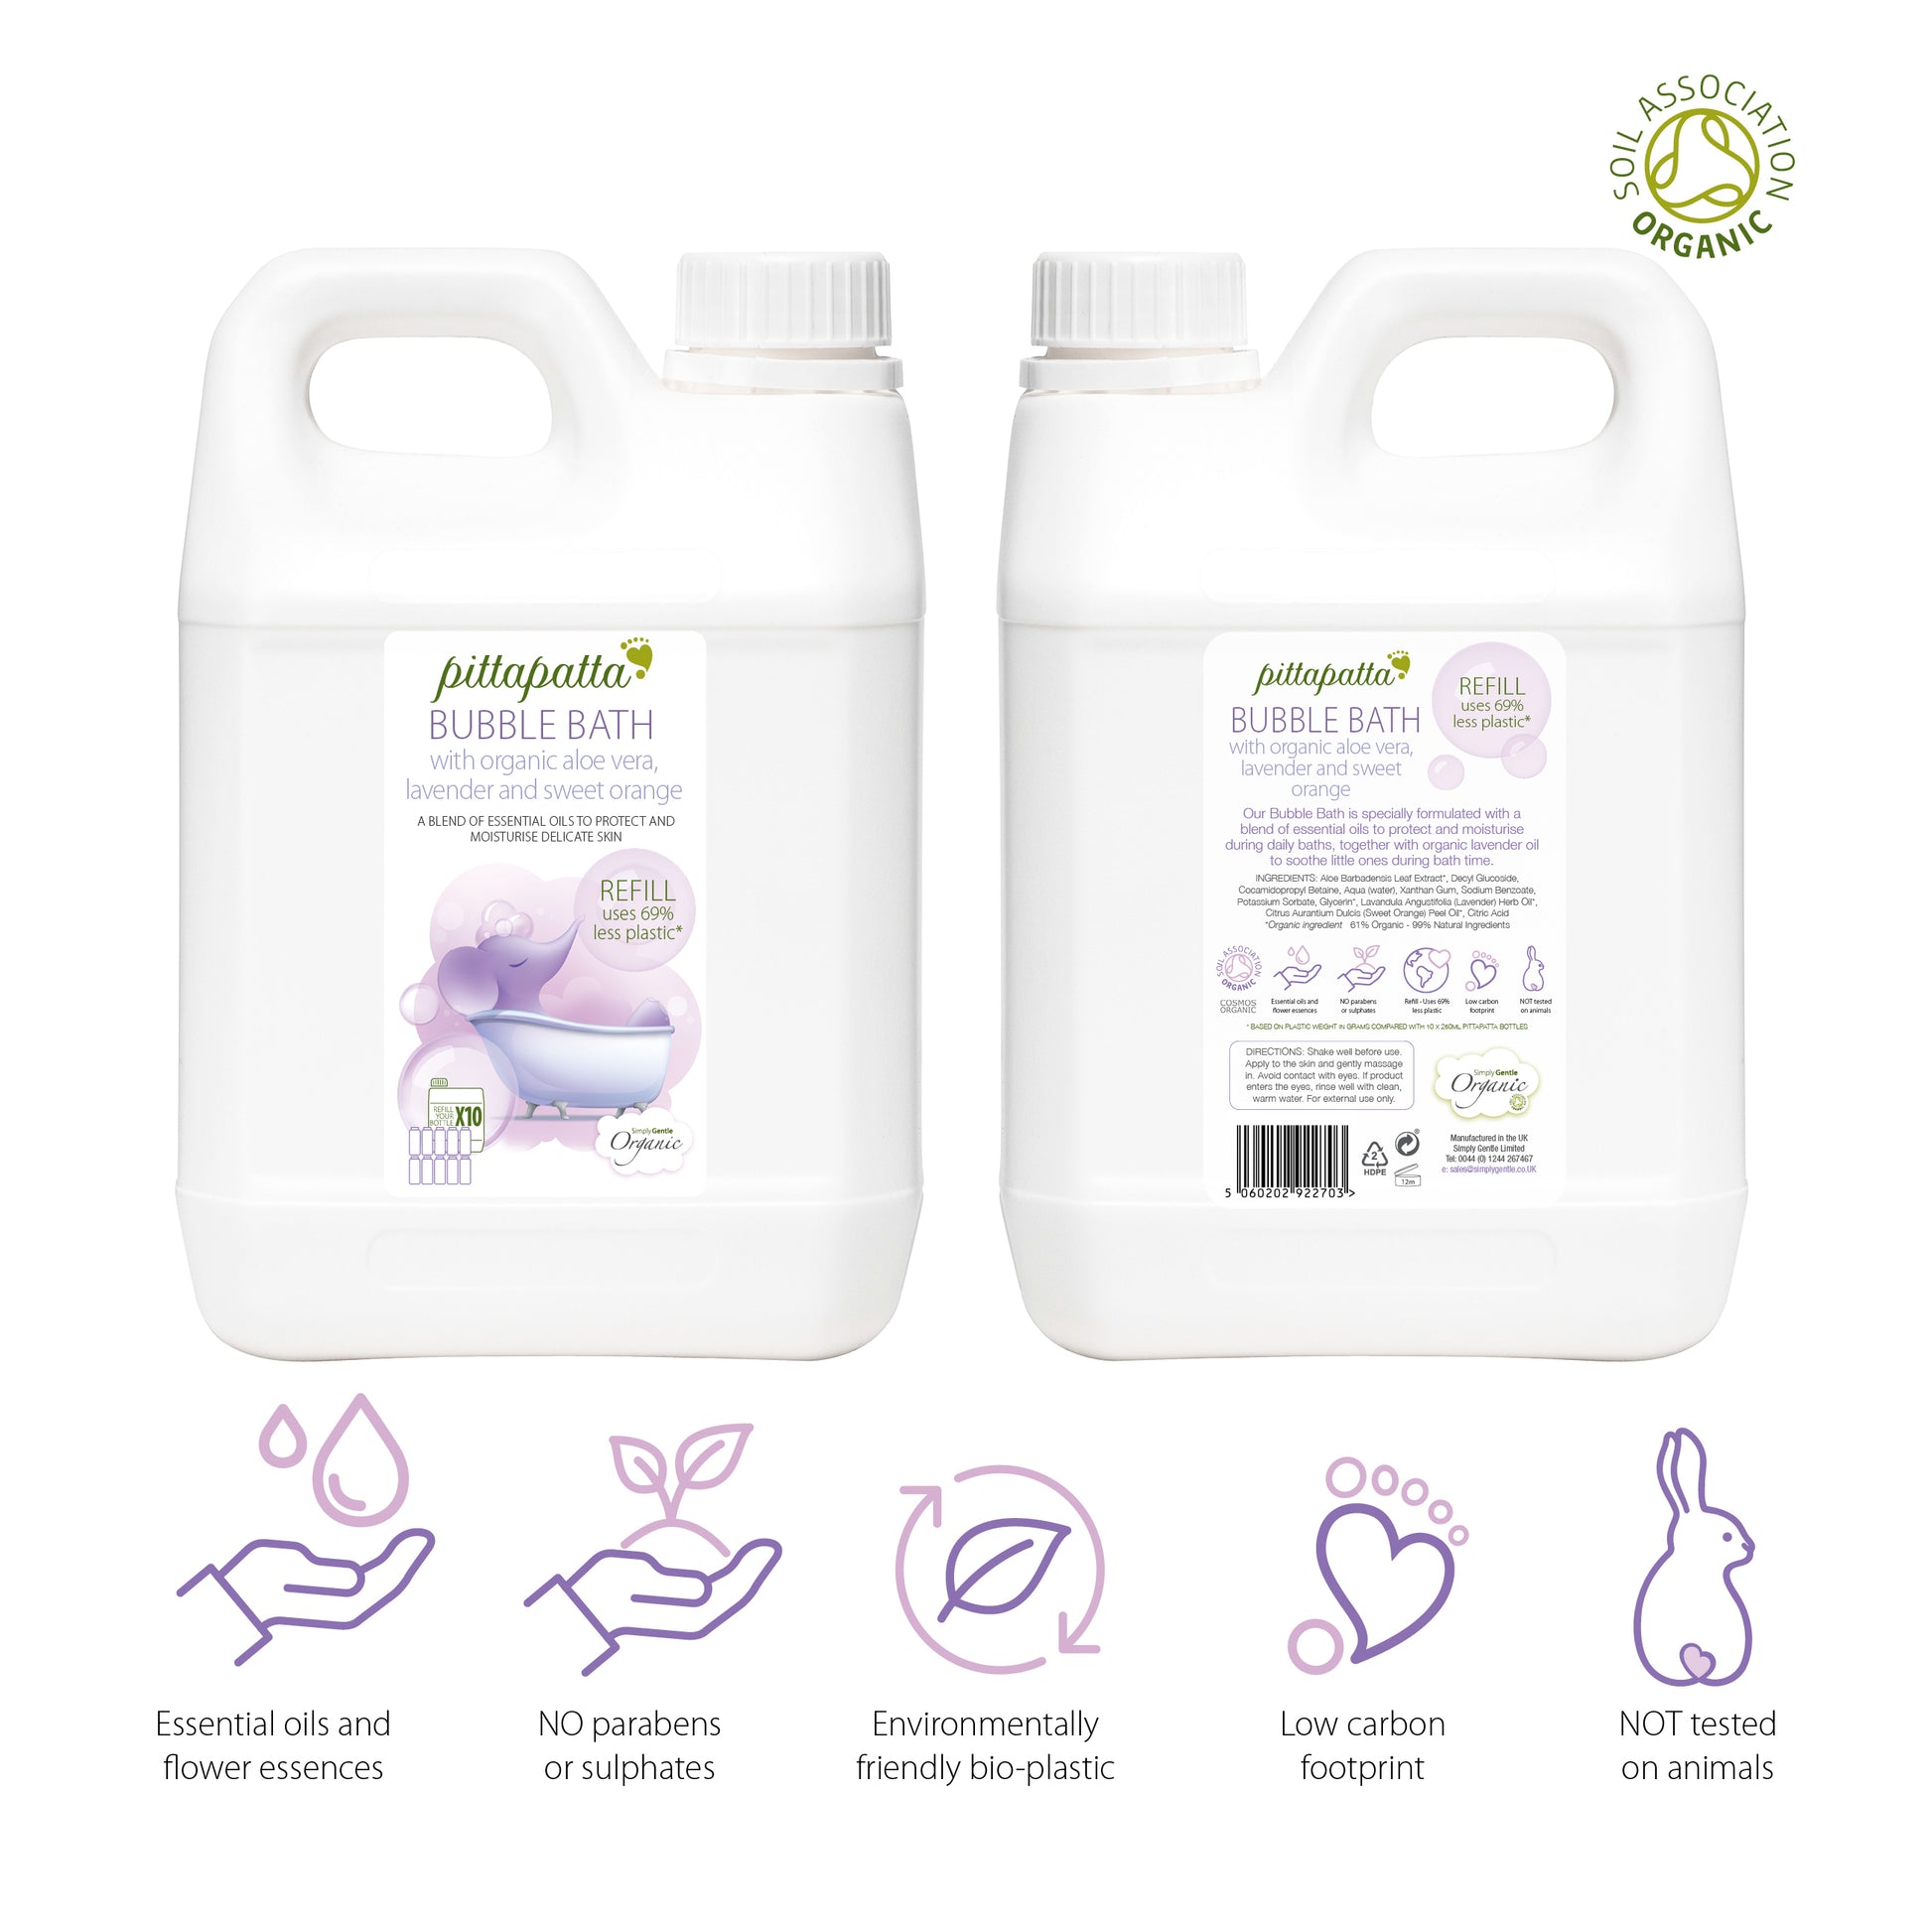 Pittapatta Bubble Bath is made from natural and organic ingredients and infused with organic essential oils and flower essences designed to be gentle and a joy to use.